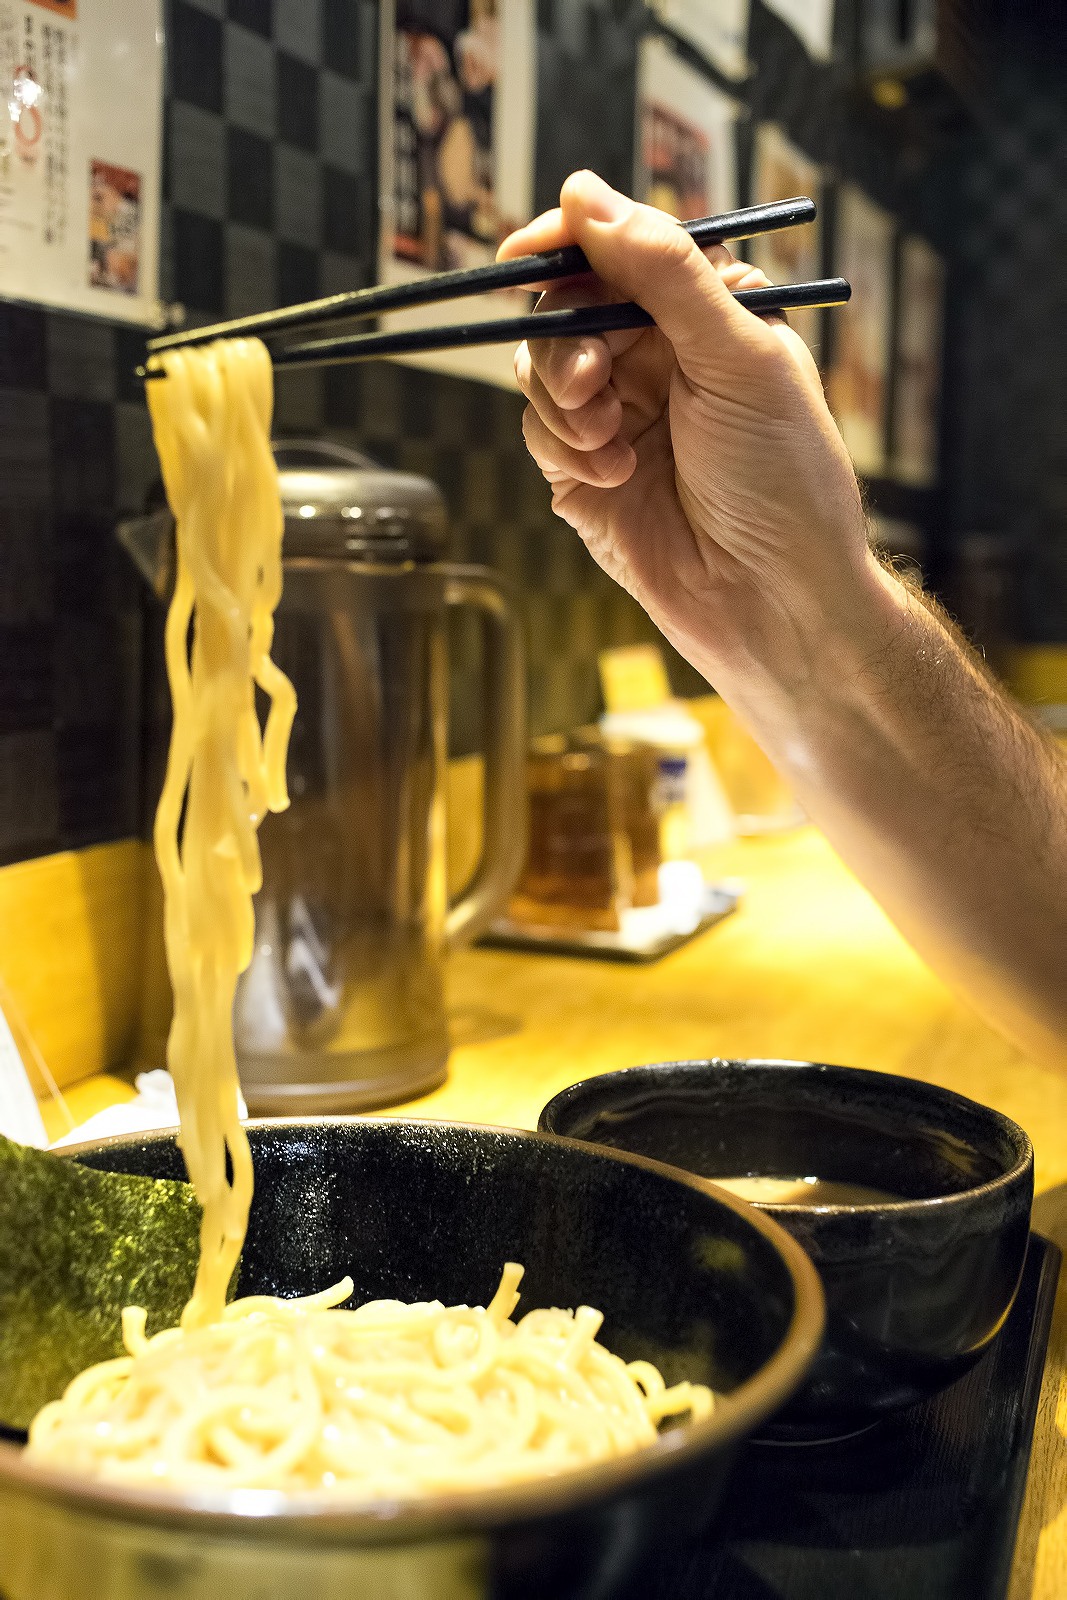 Dipping Ramen noodles typical for Tokyo.